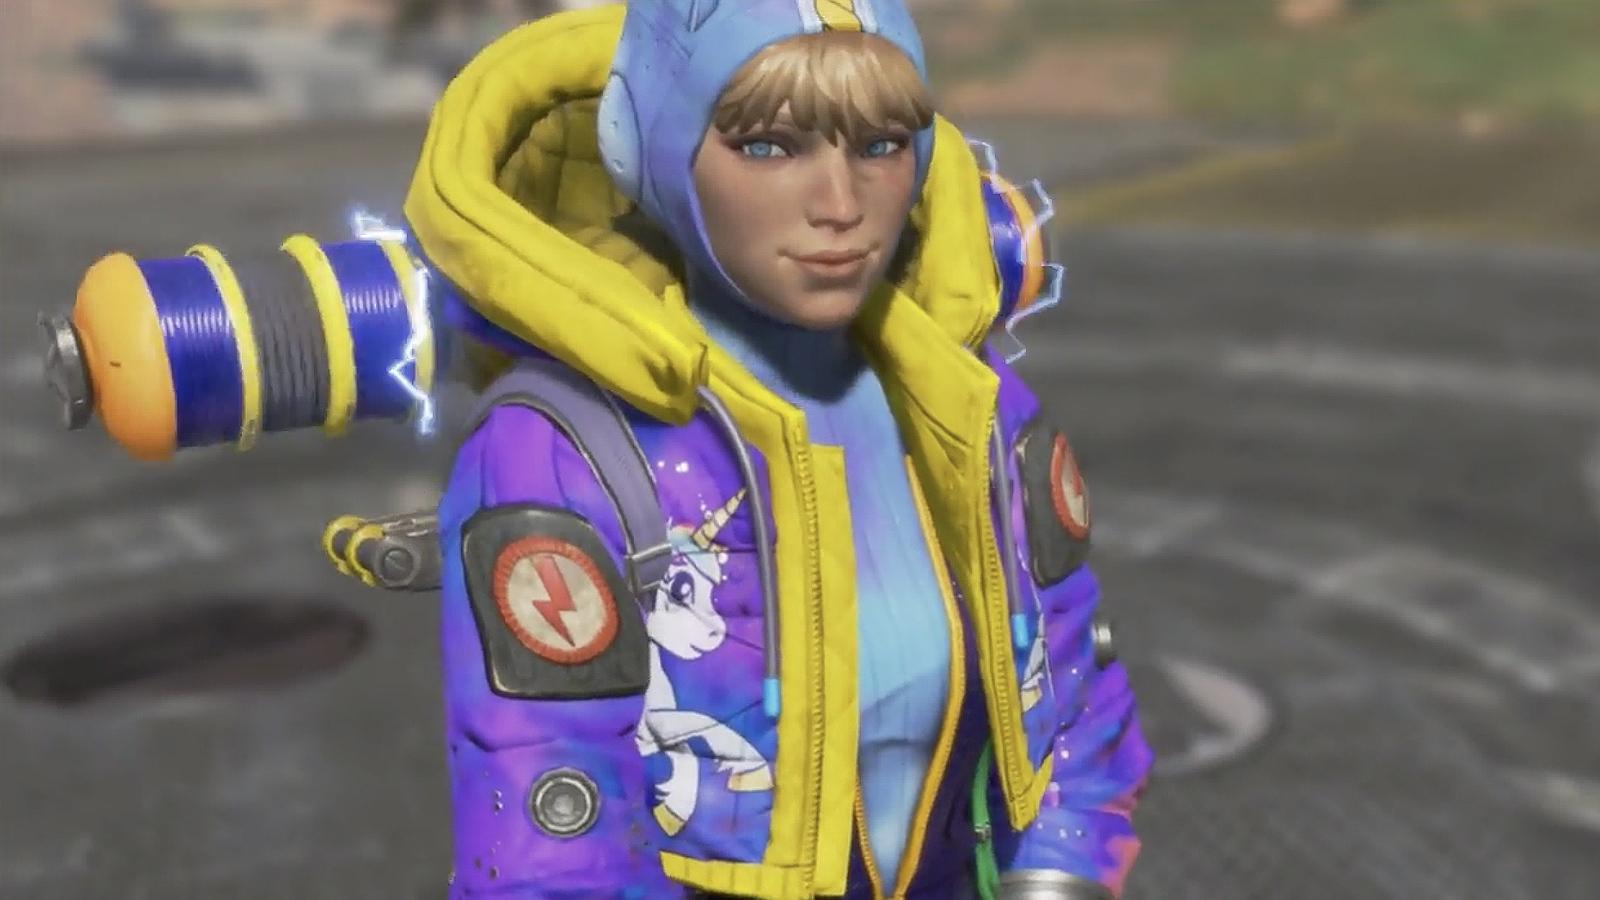 Twitch Prime members get two Apex Legends skins to celebrate